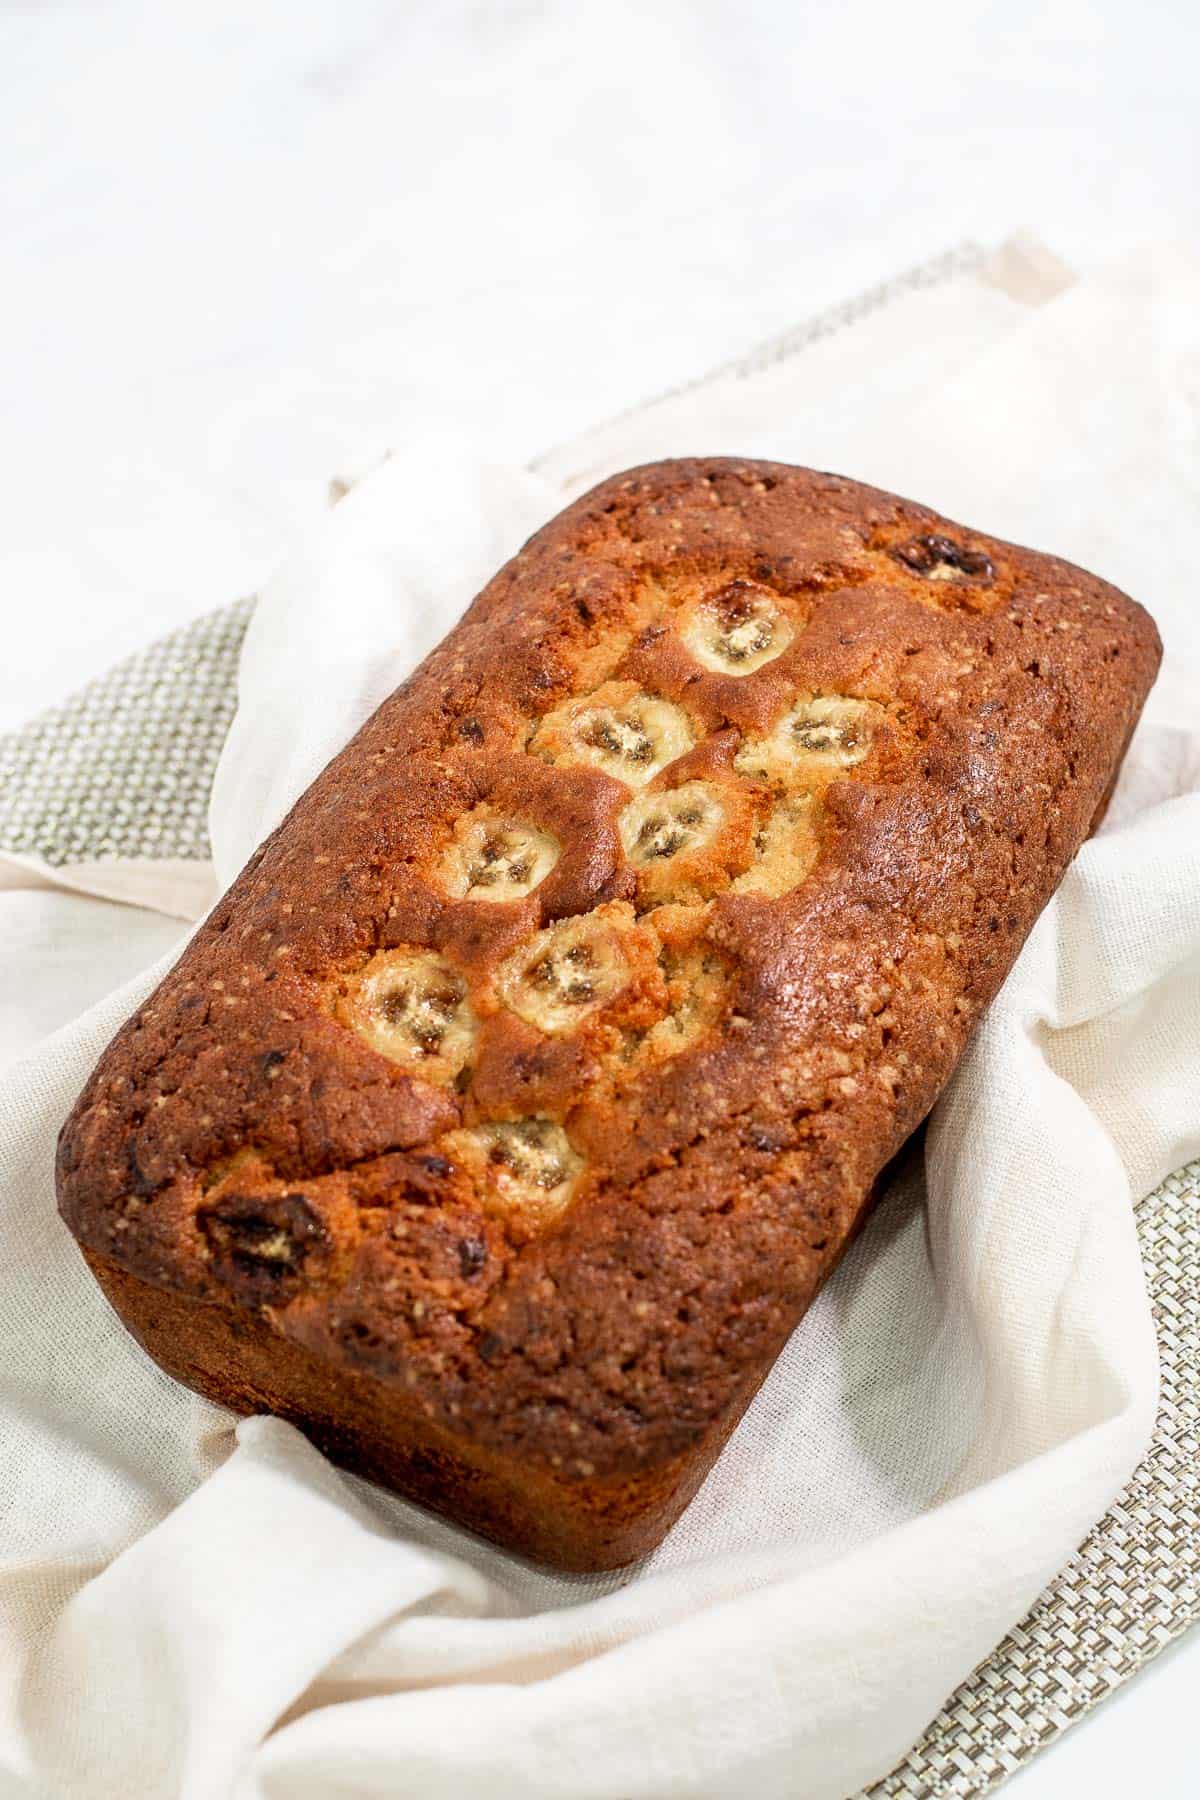 A loaf of cake baked with banana slices on top.